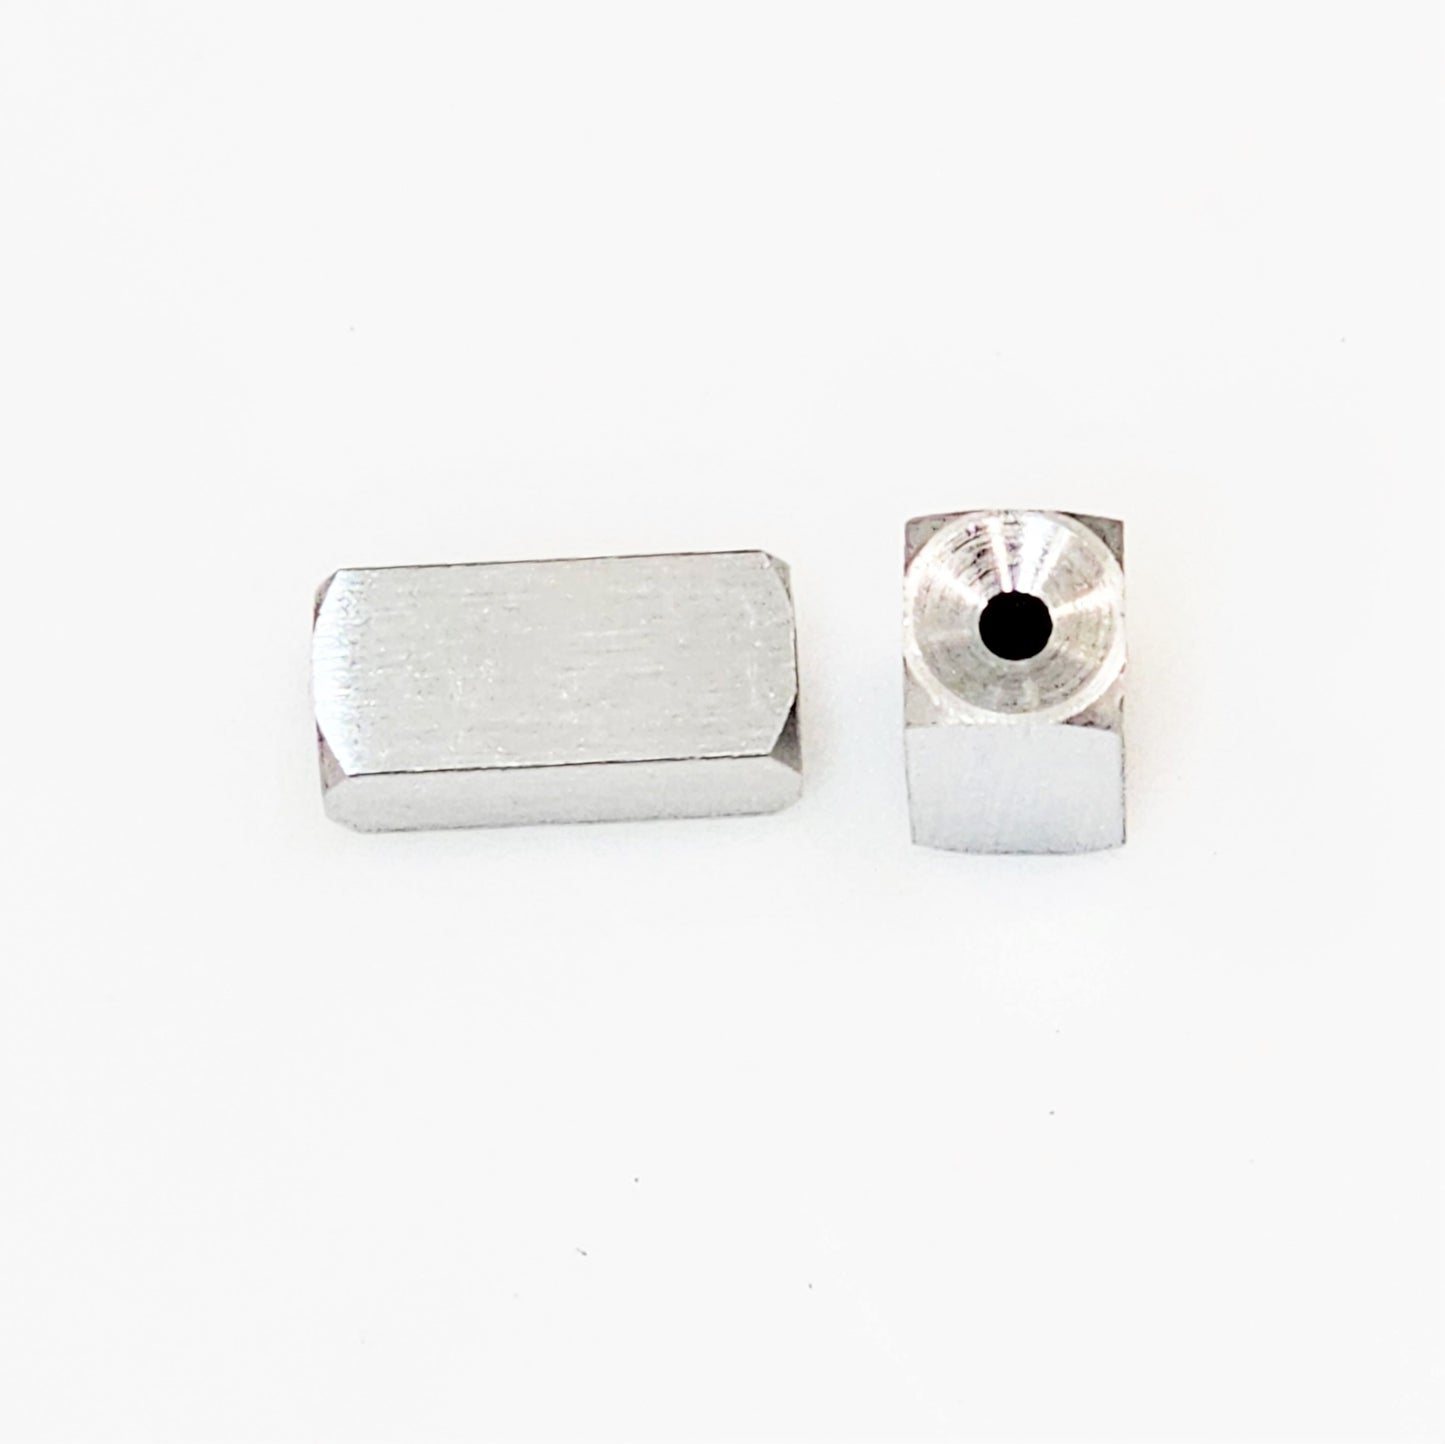 Stainless Steel Square Bar - 6mm x 13mm